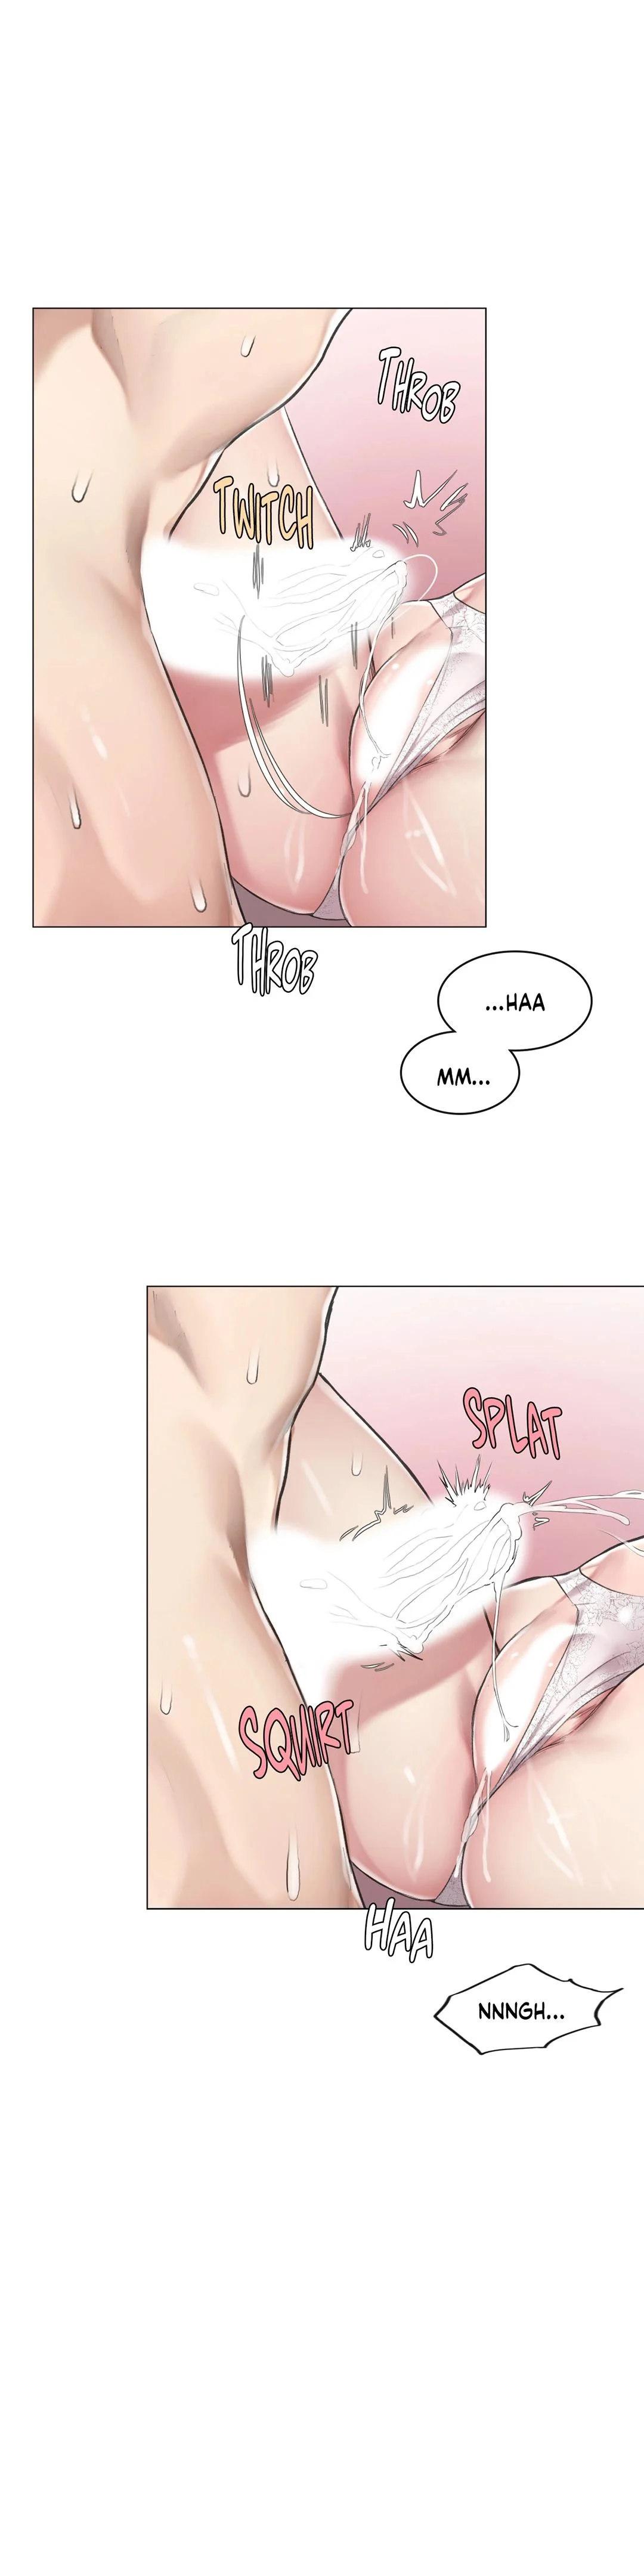 [Dumangoon, KONG_] Sexcape Room: Snap Off Ch.7/7 [English] [Manhwa PDF] Completed 124